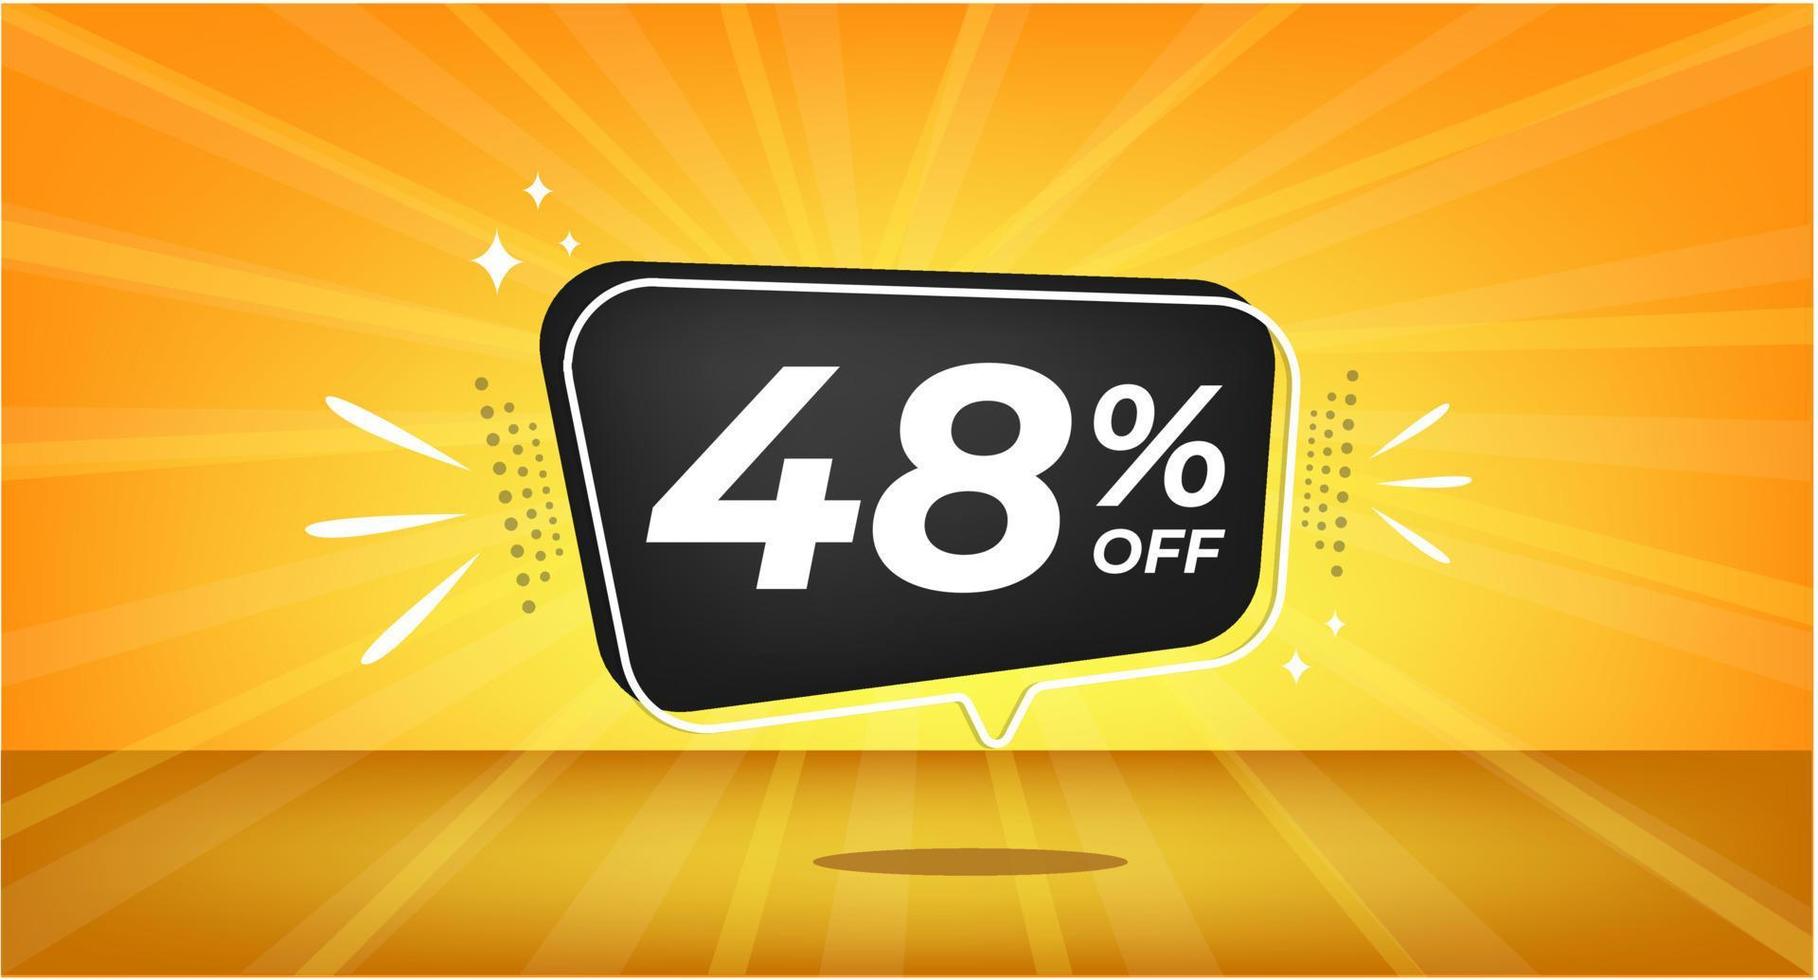 48 percent off. Yellow banner with forty-eight percent discount on a black balloon for mega big sales. vector